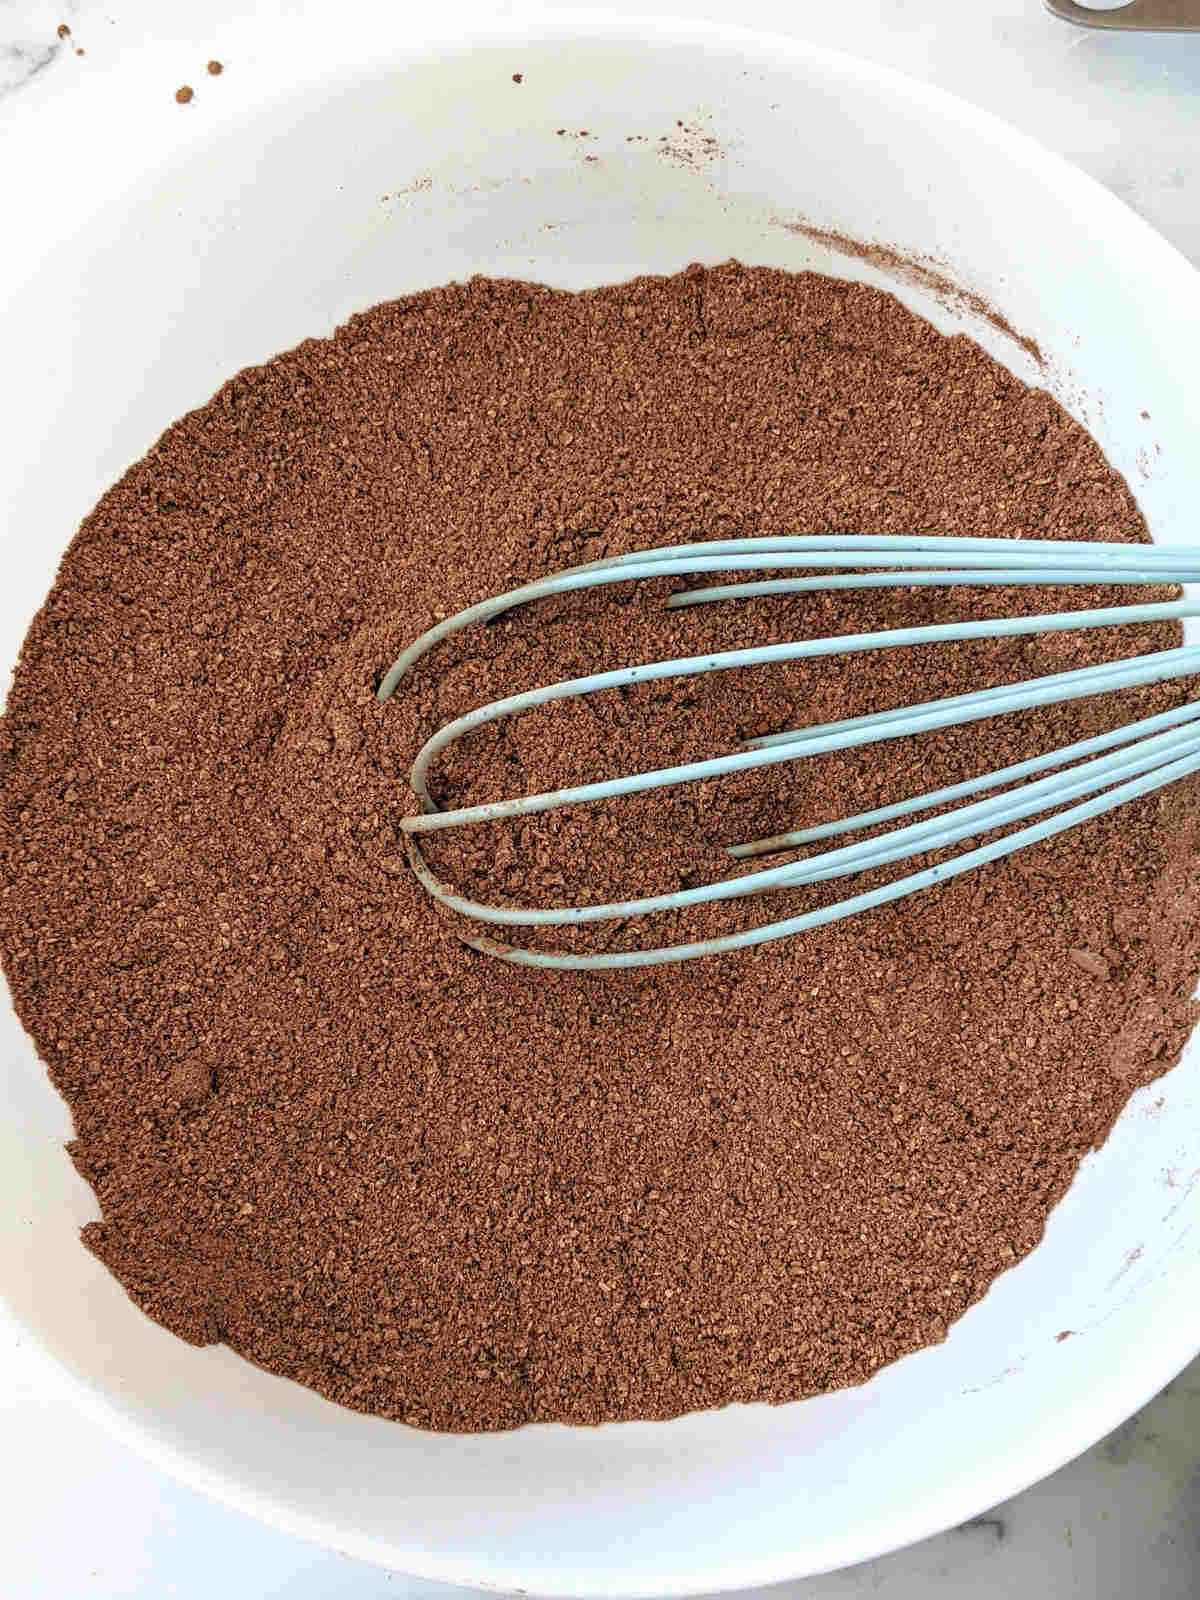 Dry ingredients for gluten free vegan chocolate cupcakes in a large mixing bowl mixed together with a whisk.